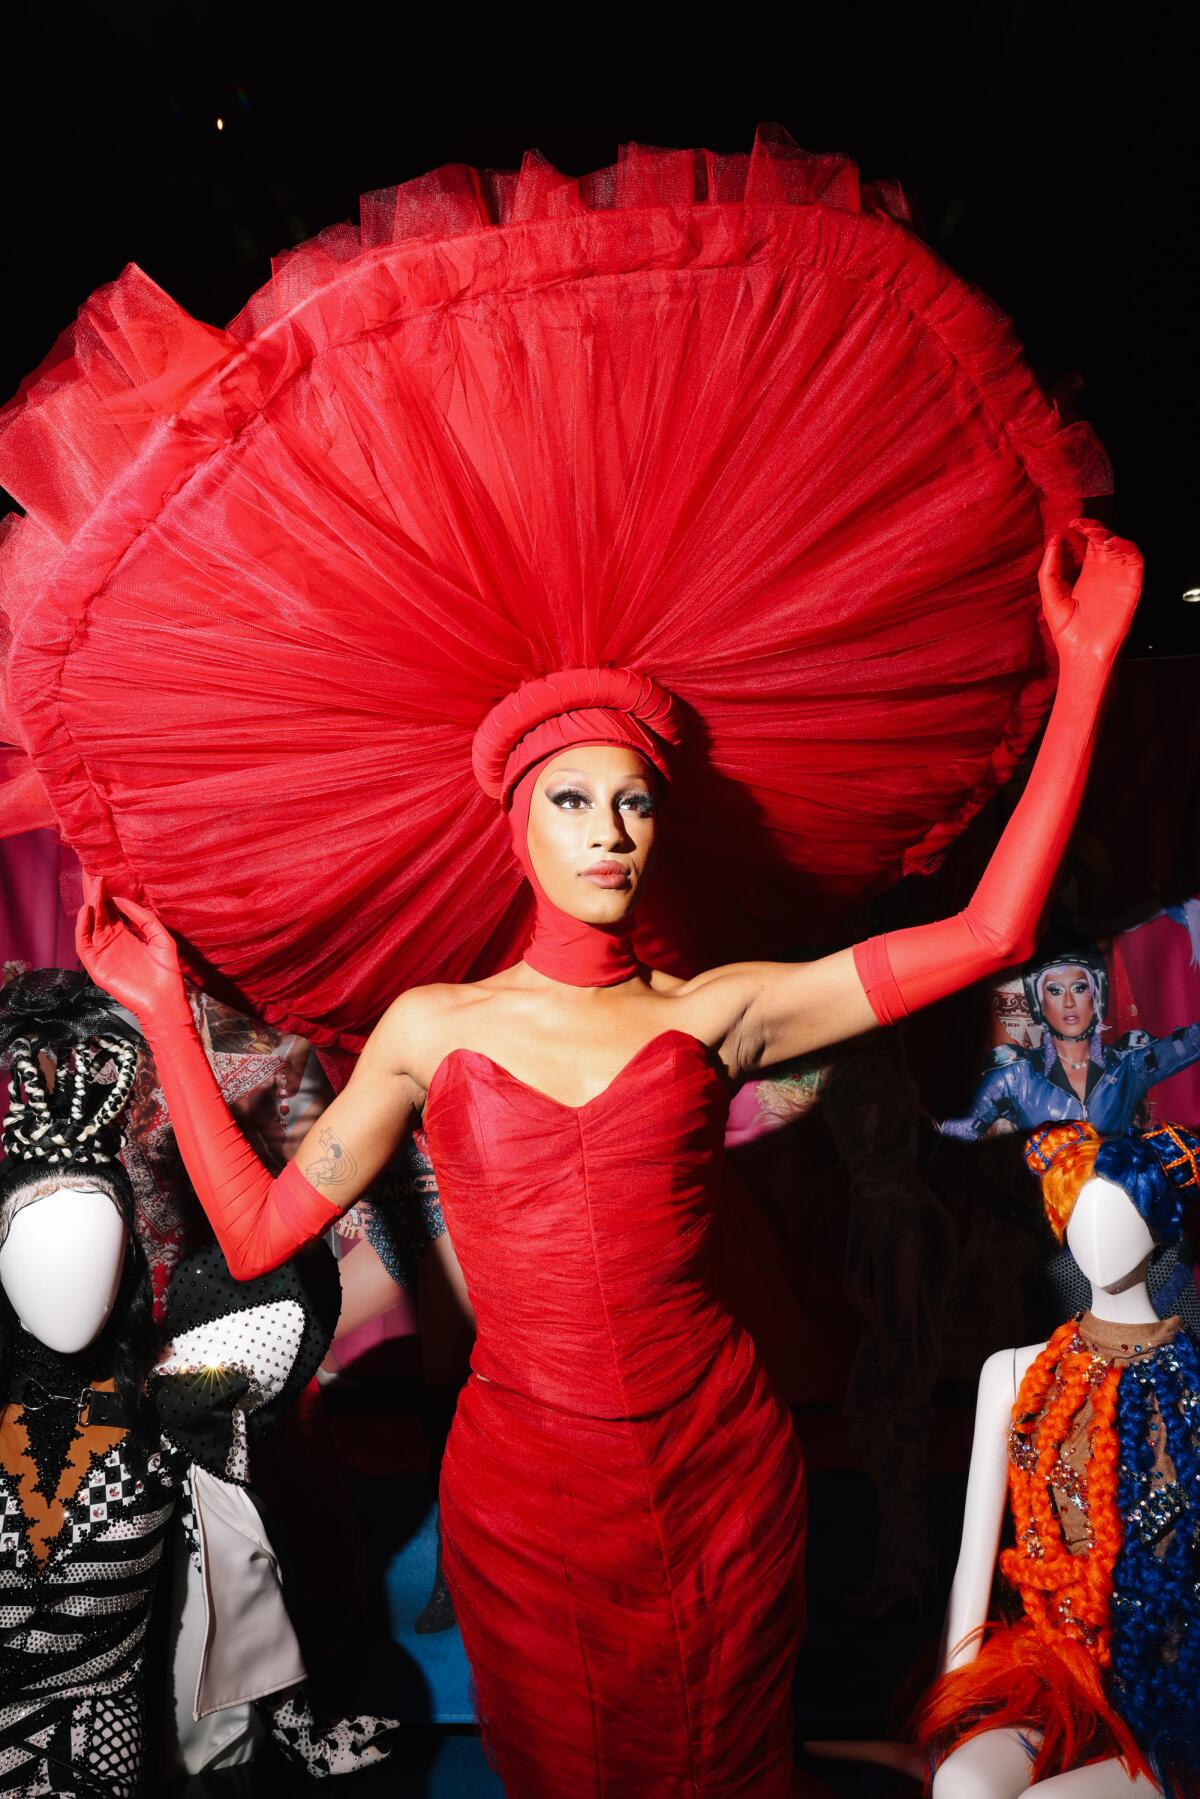 A person in drag poses with their hands on their huge hat.